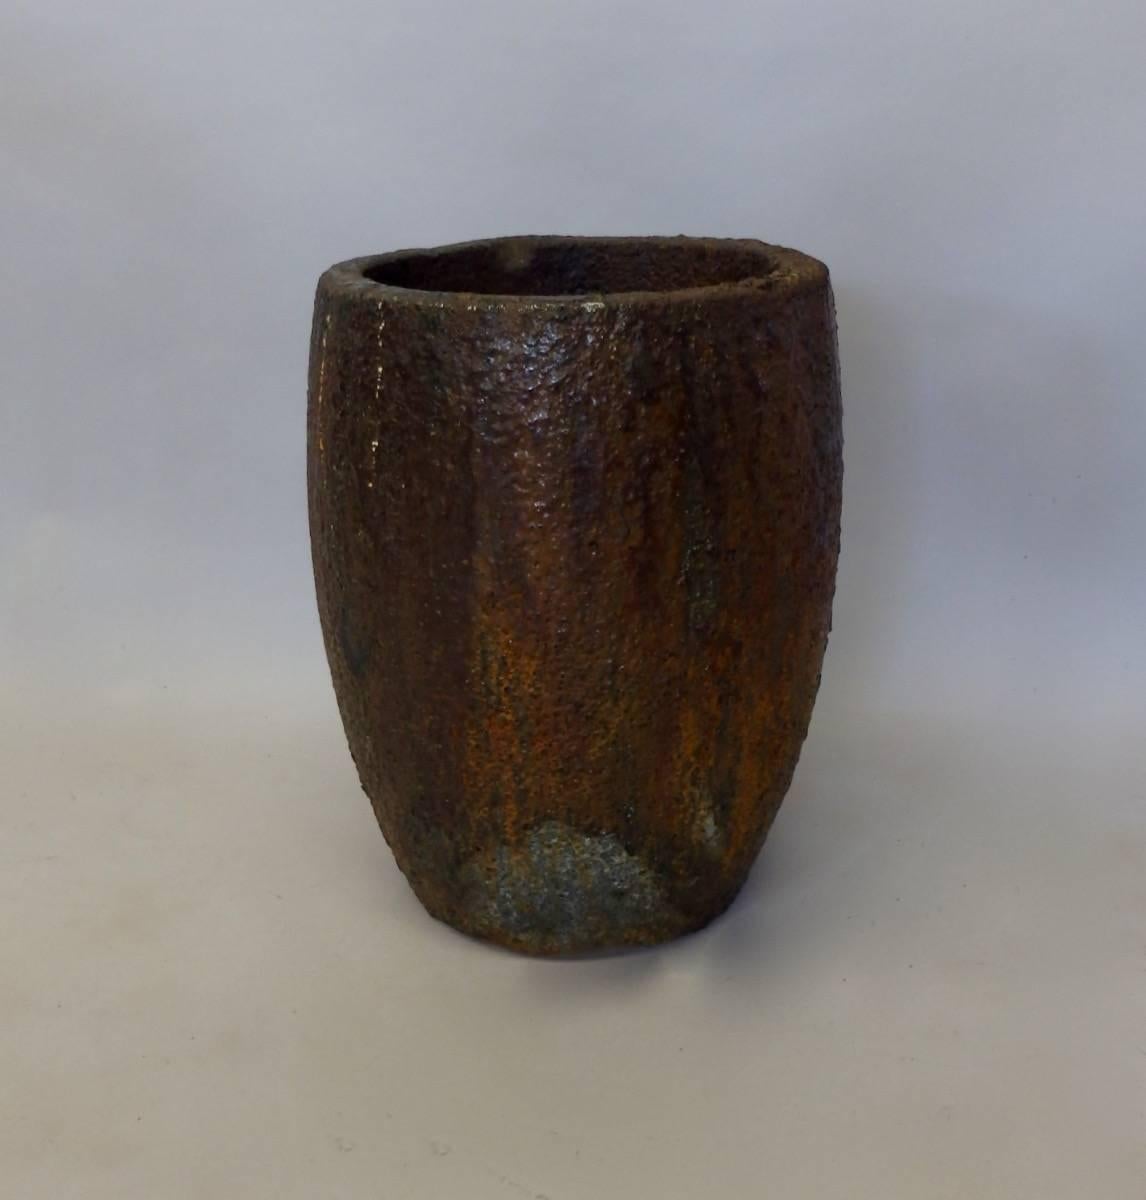 Thick and heave crucible. Brutalist floor vase or planter pot. Excellent as found patina. There is a crack in the body plenty stabile for home use but retired from its original function.